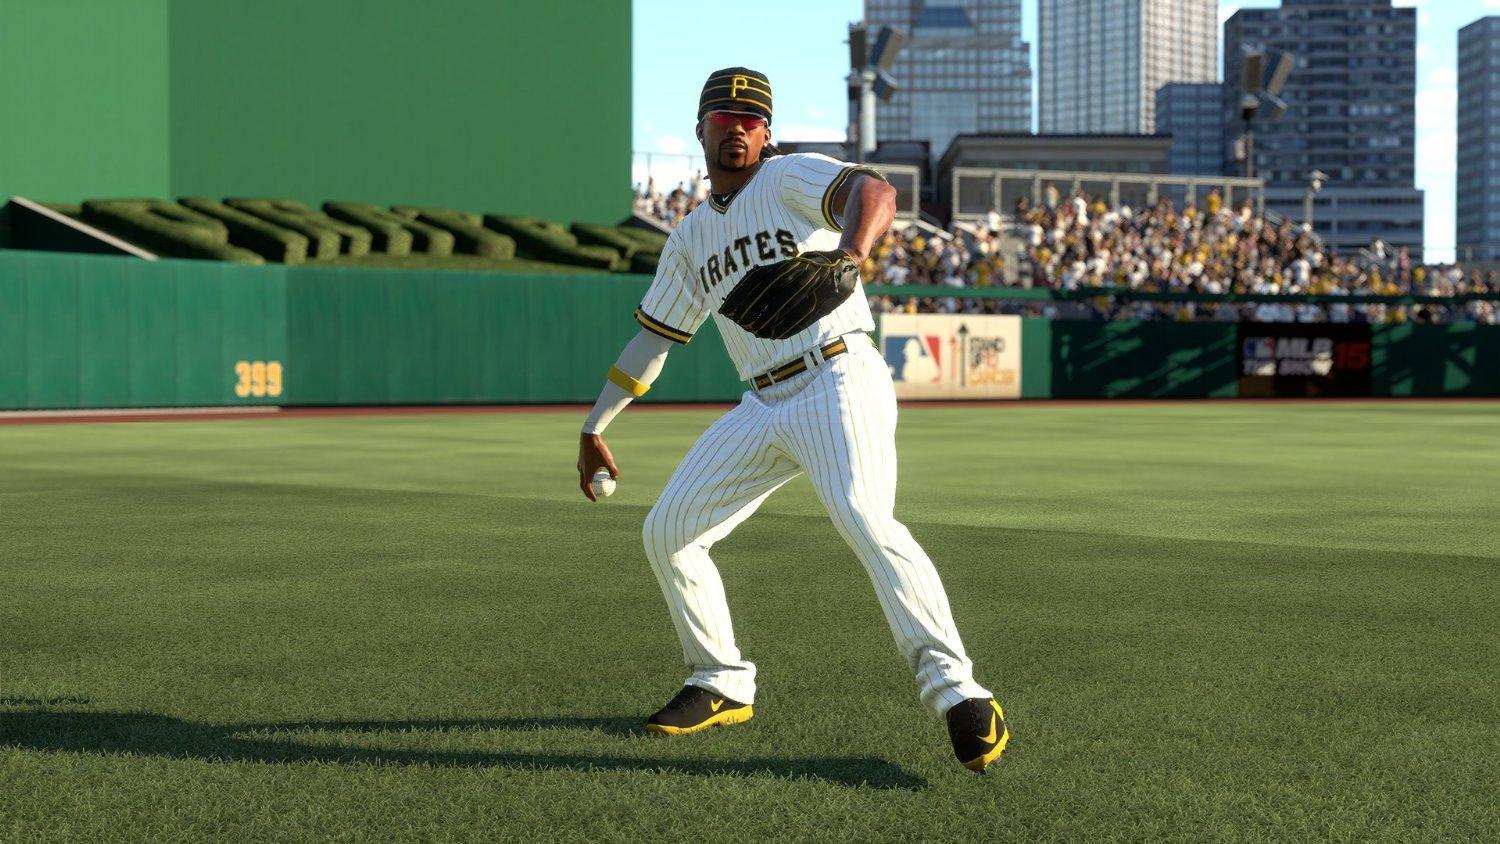 MLB 15 The Show - PlayStation 3